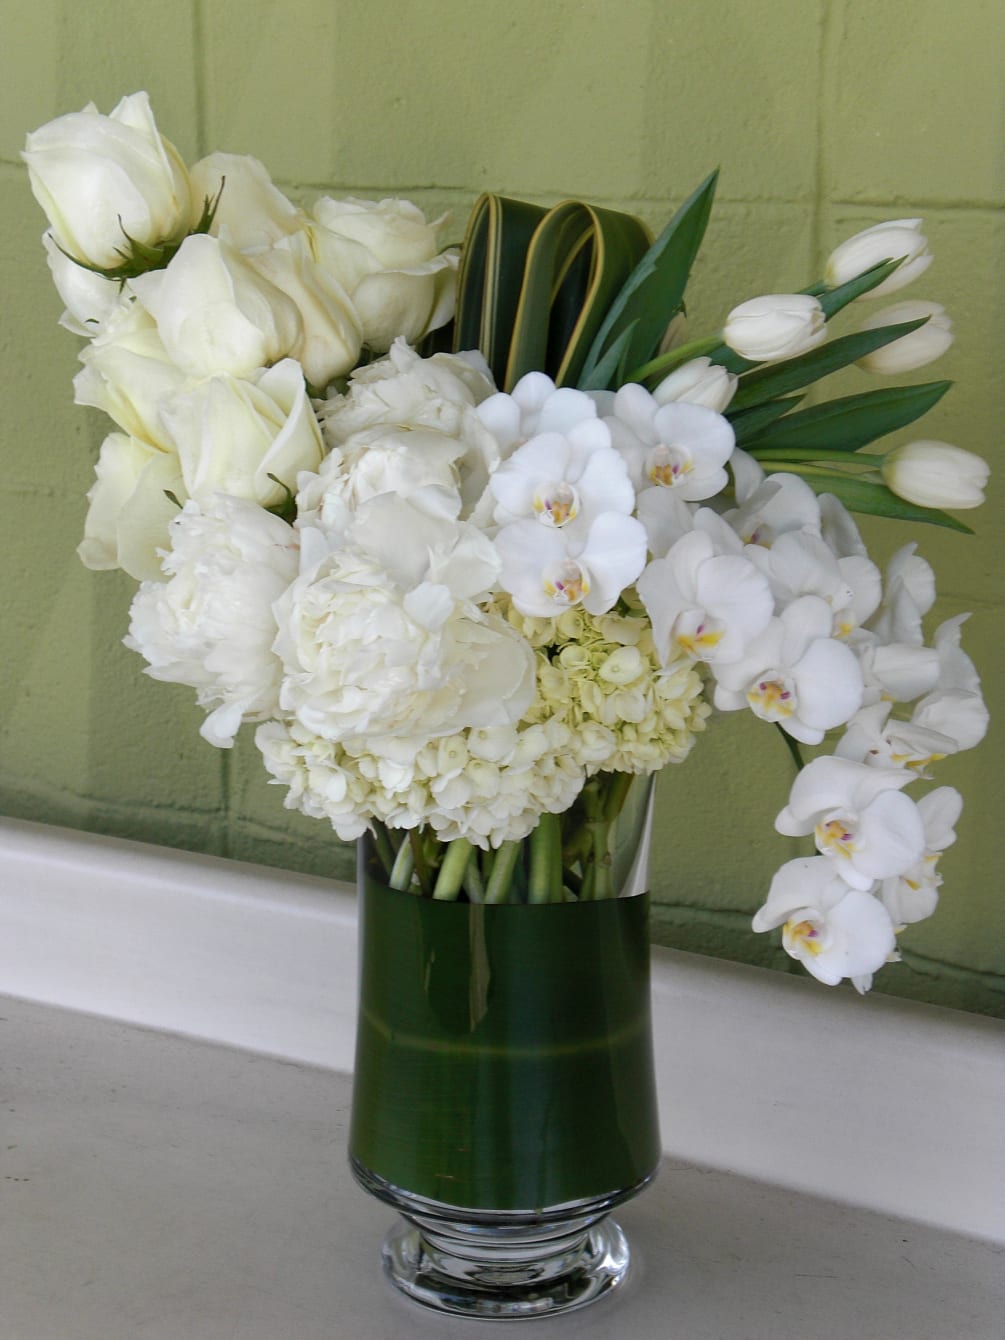 Discover the luminous beauty of Dave&#039;s Flowers&#039; exquisite floral creation &ndash; an